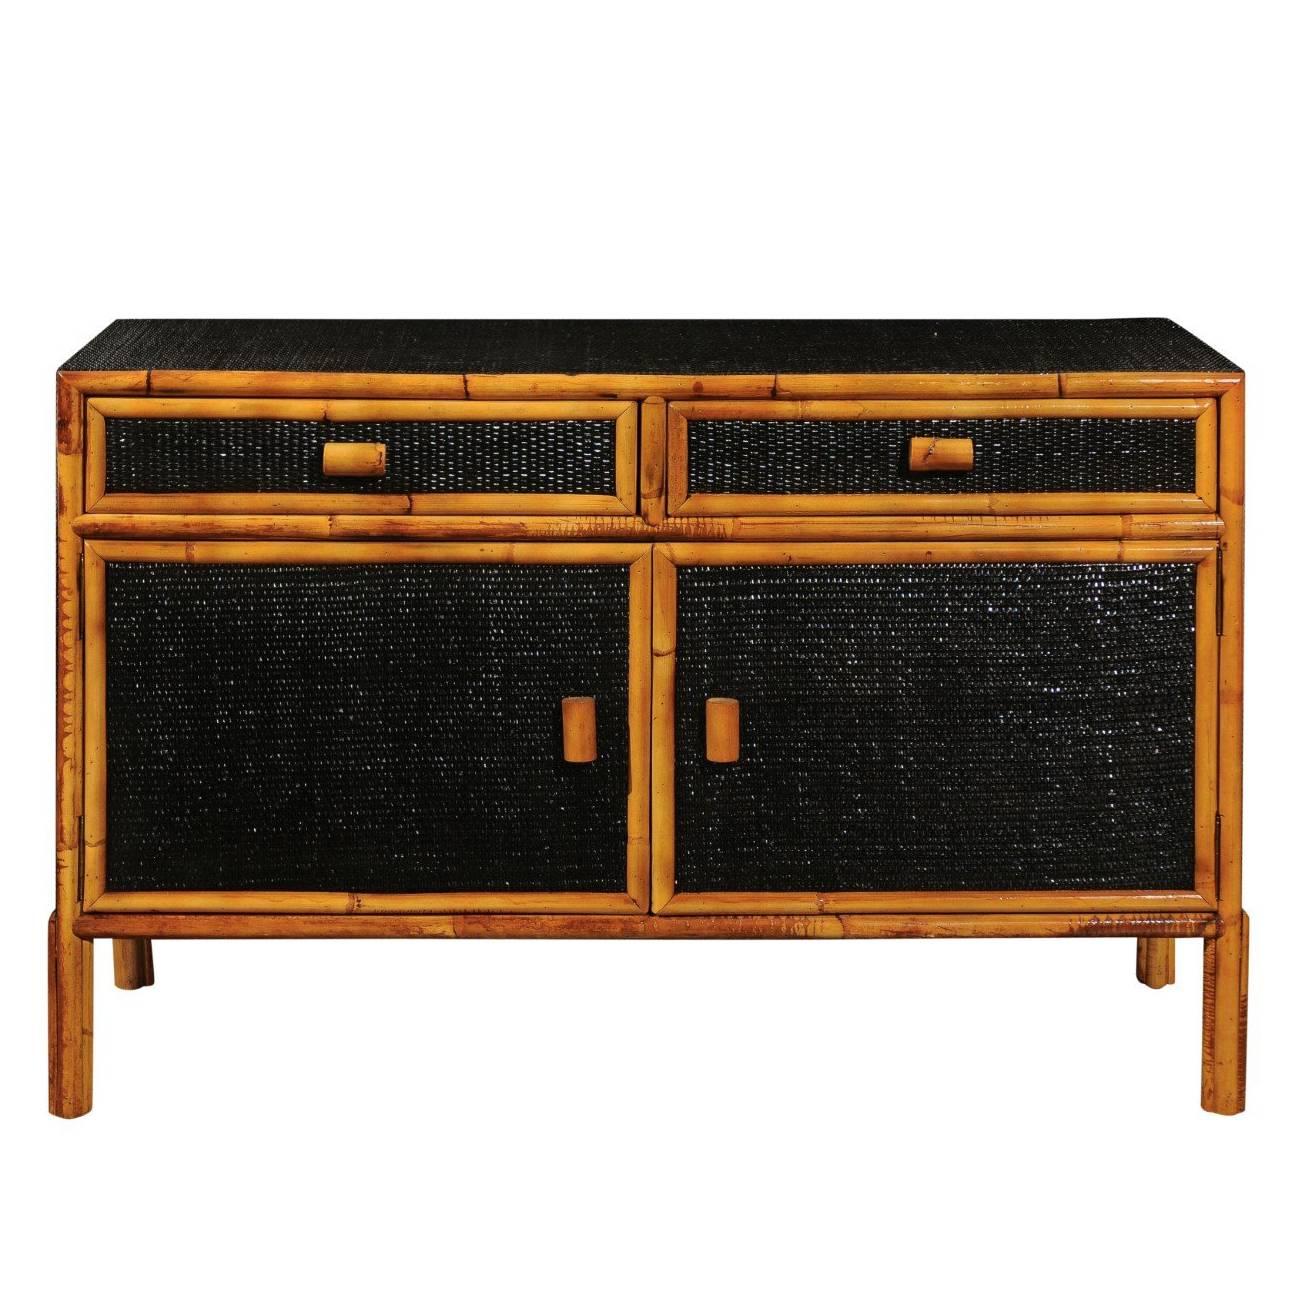 Elegant Vintage Black Lacquer Cane Cabinet with Bamboo Accents, circa 1970 For Sale